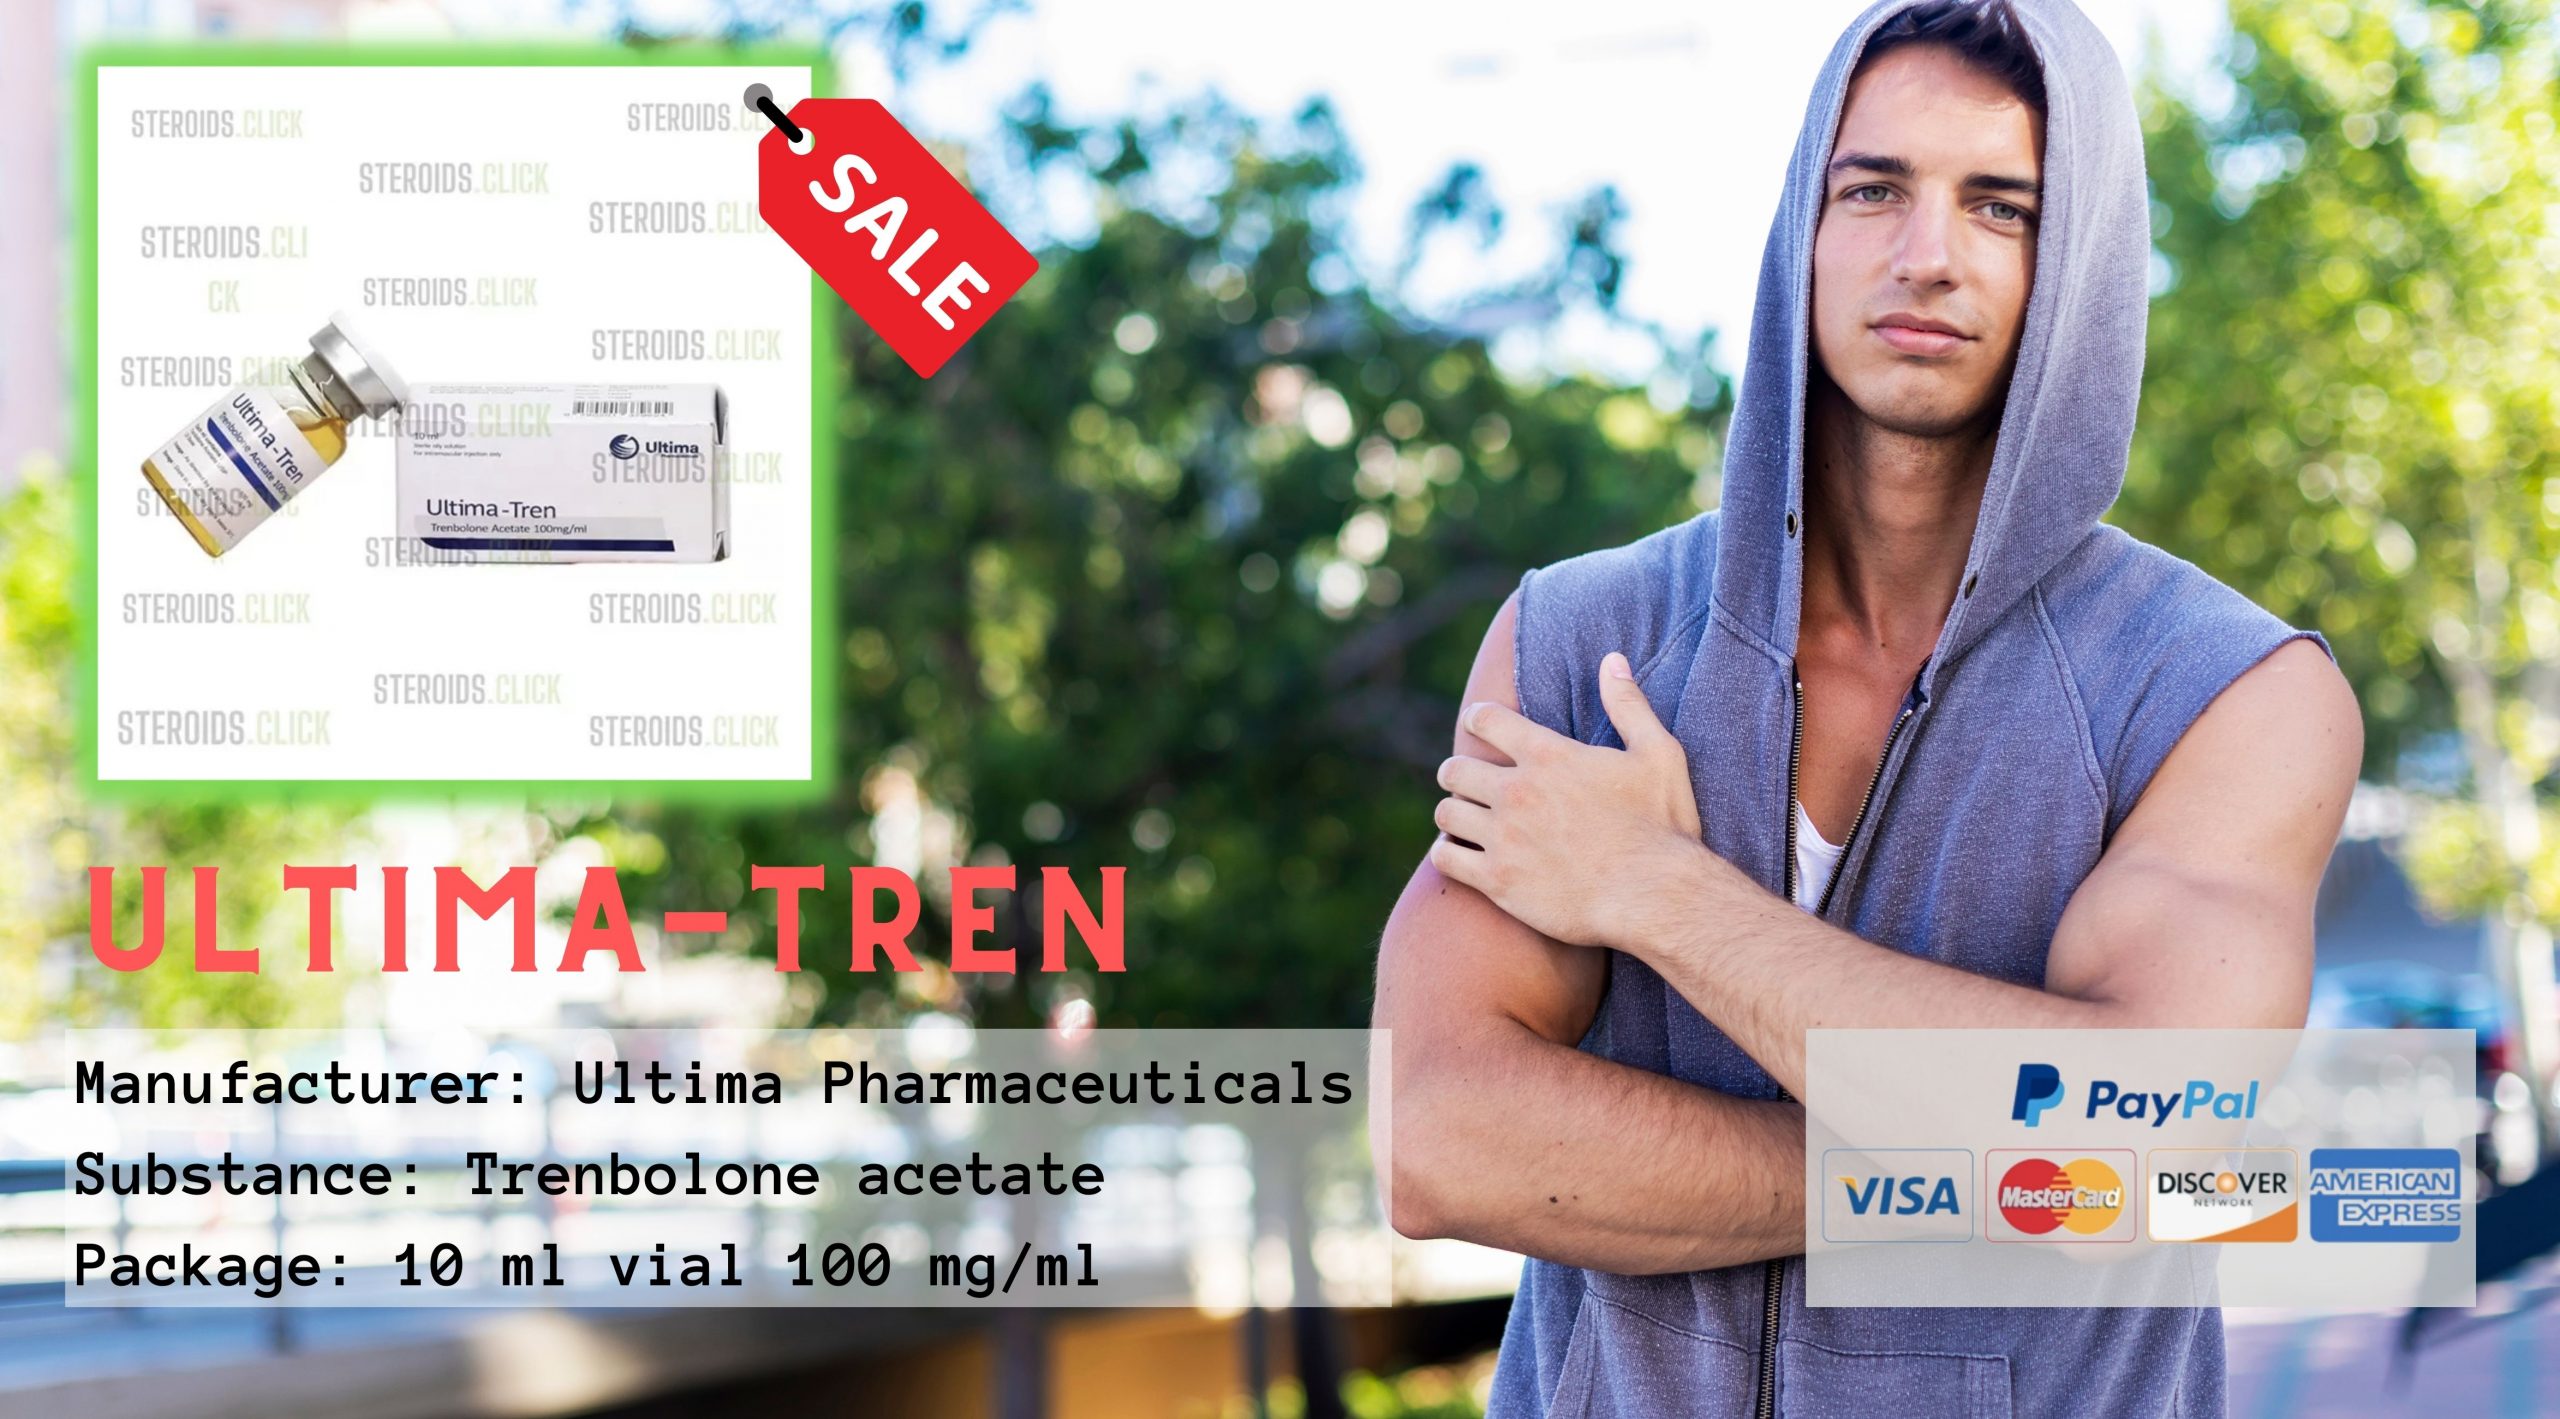 buy ultima-tren at steroids.click